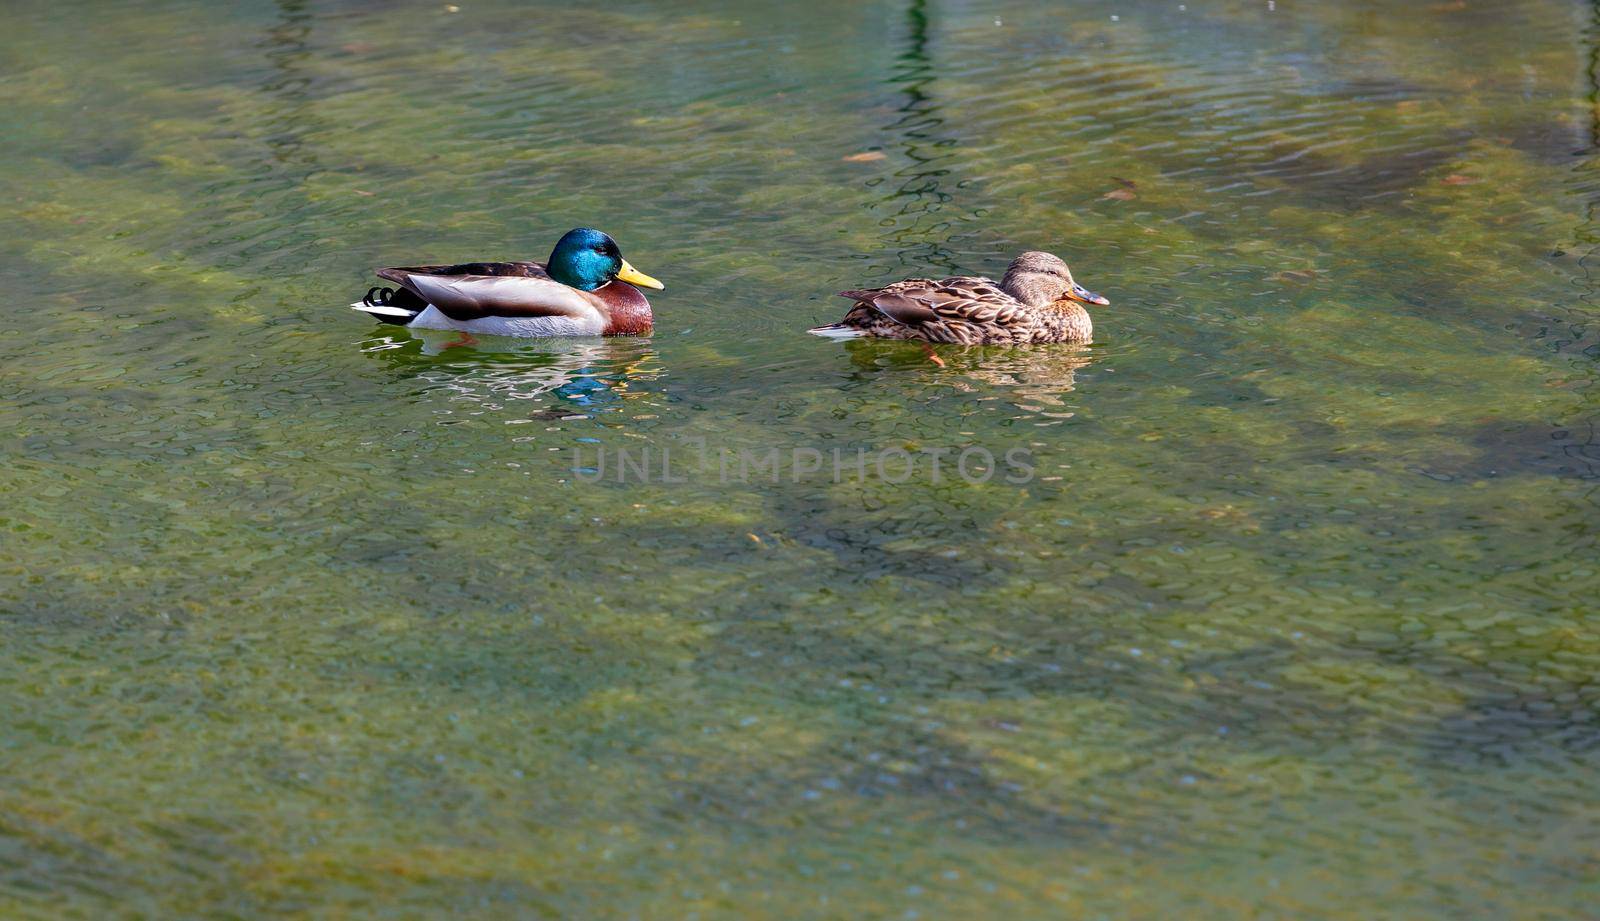 Two beautiful wild ducks, a drake and a female, calmly swim along the surface of a forest lake, peacefully basking in the sun.